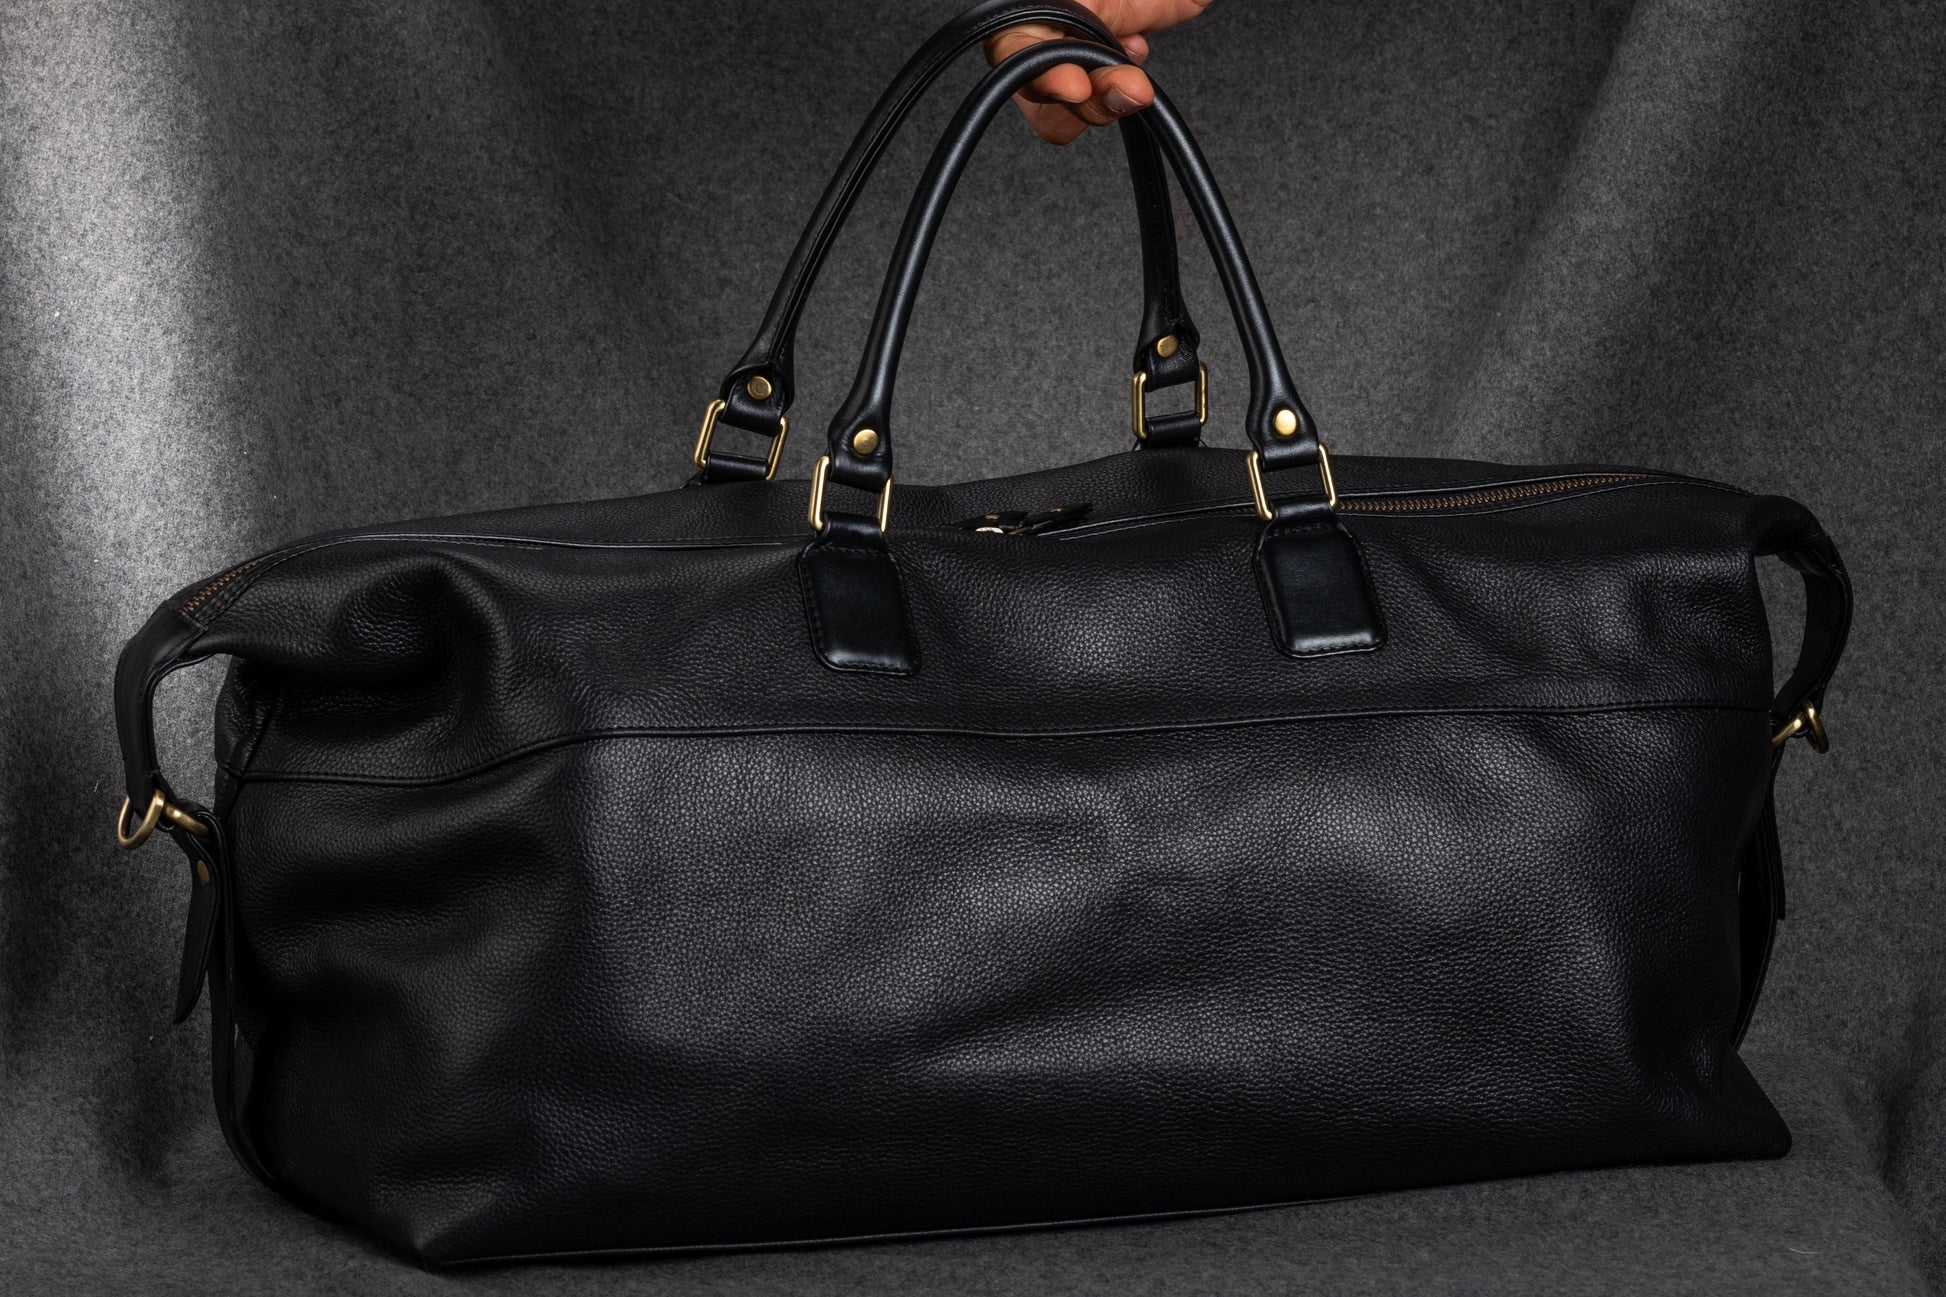 Duffle Bag can be carried in Hand or on Shoulders with the removable adjustable strap